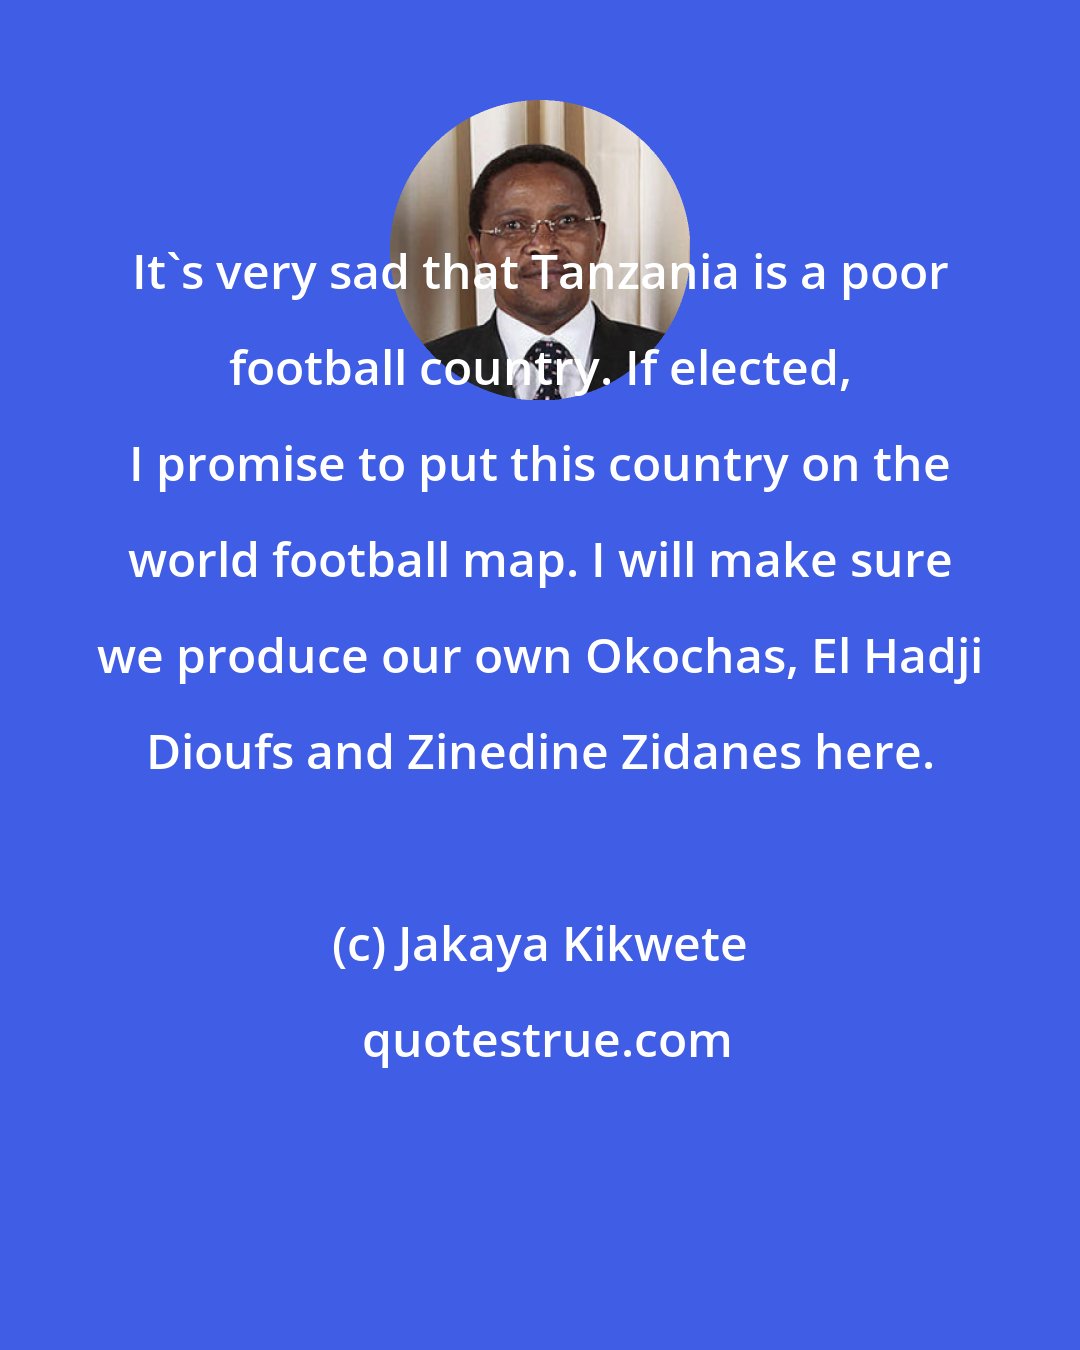 Jakaya Kikwete: It's very sad that Tanzania is a poor football country. If elected, I promise to put this country on the world football map. I will make sure we produce our own Okochas, El Hadji Dioufs and Zinedine Zidanes here.